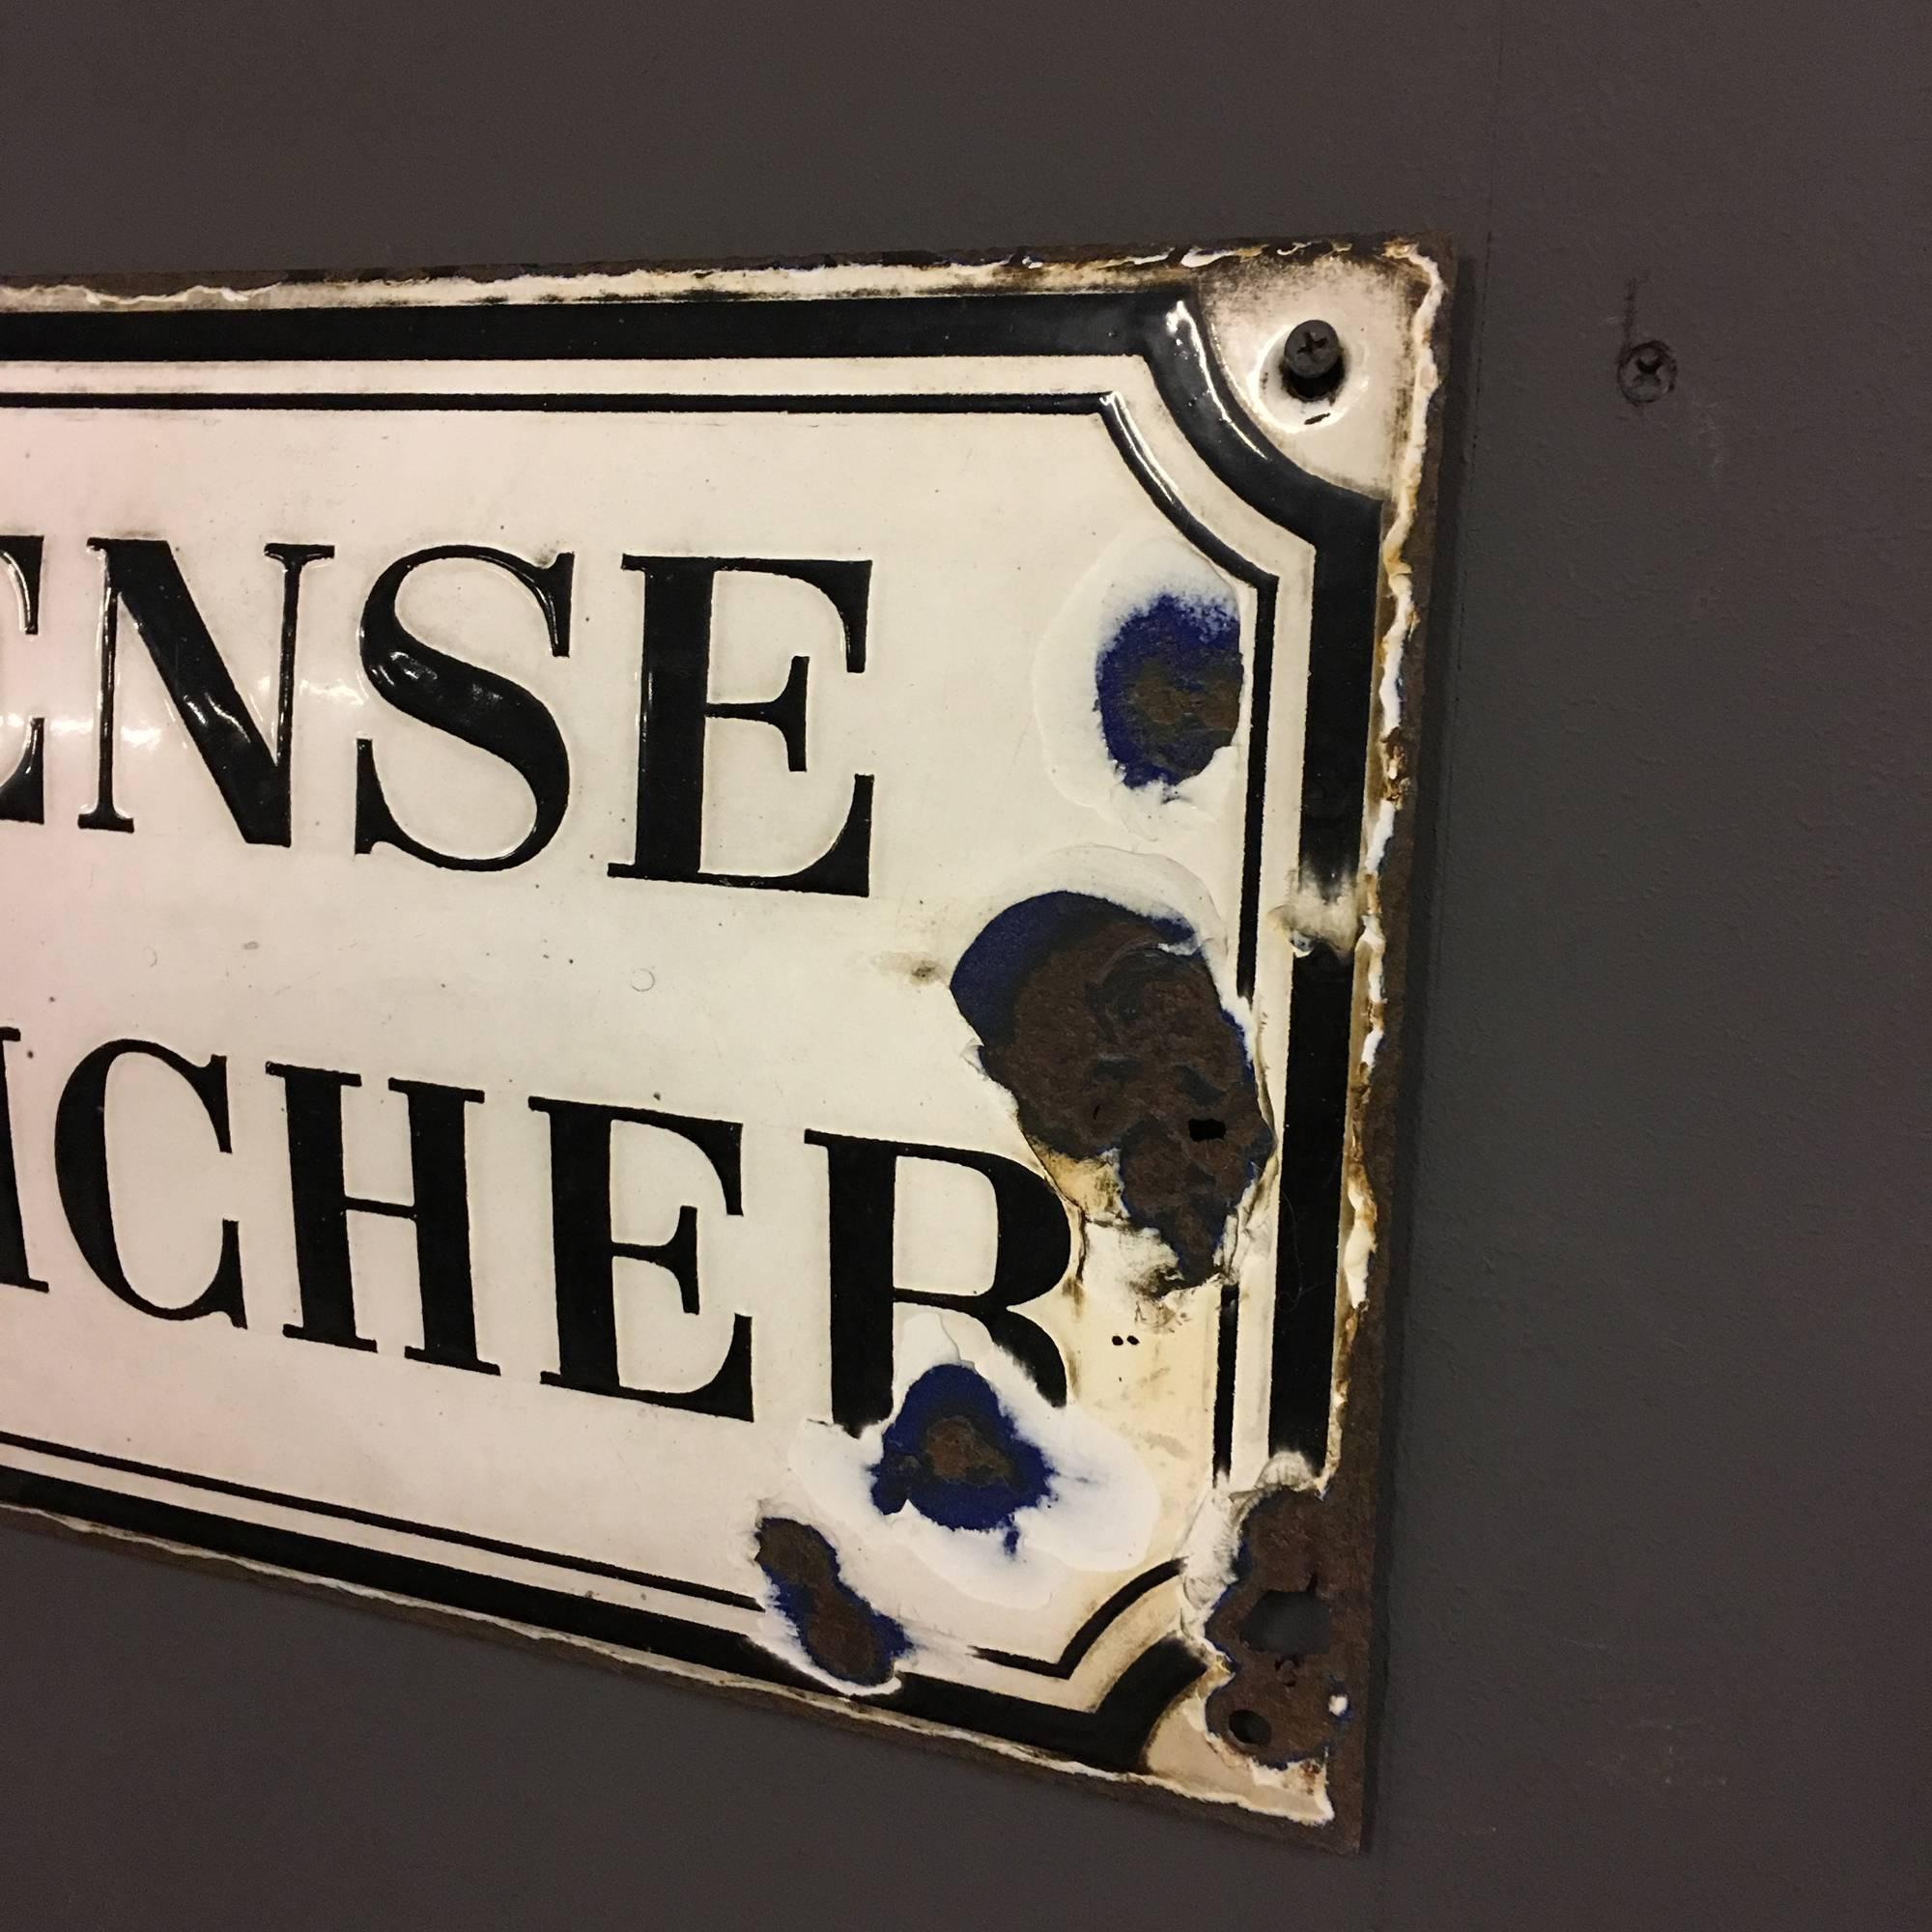 Enamel convex sign Defense d'Afficher. Forbidden to place Stickers, posters etc. Nice thick enamel. Remains in fair condition.